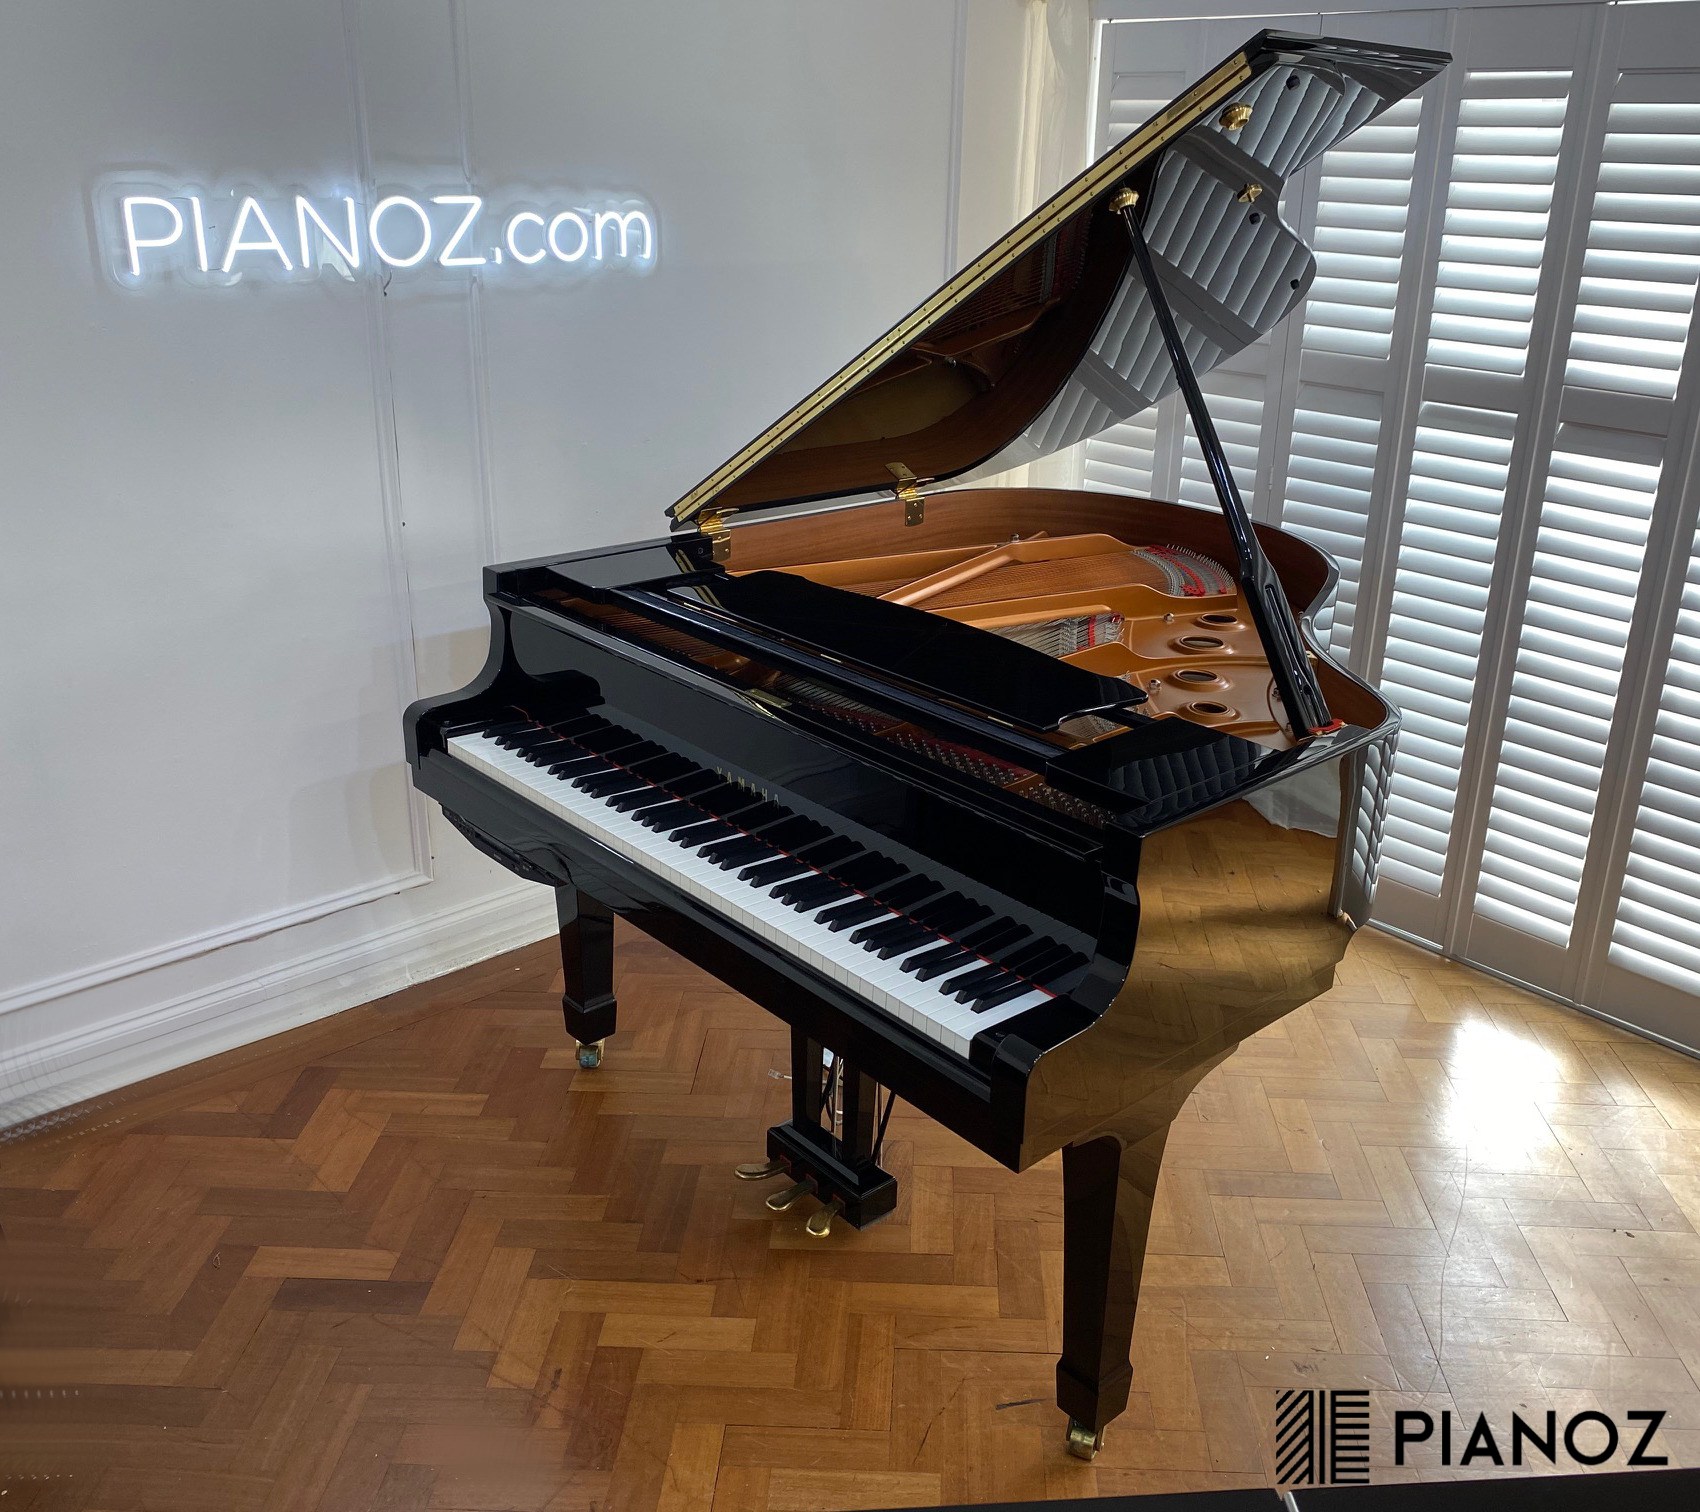 Yamaha C1 Silent Disklavier Baby Grand Piano piano for sale in UK